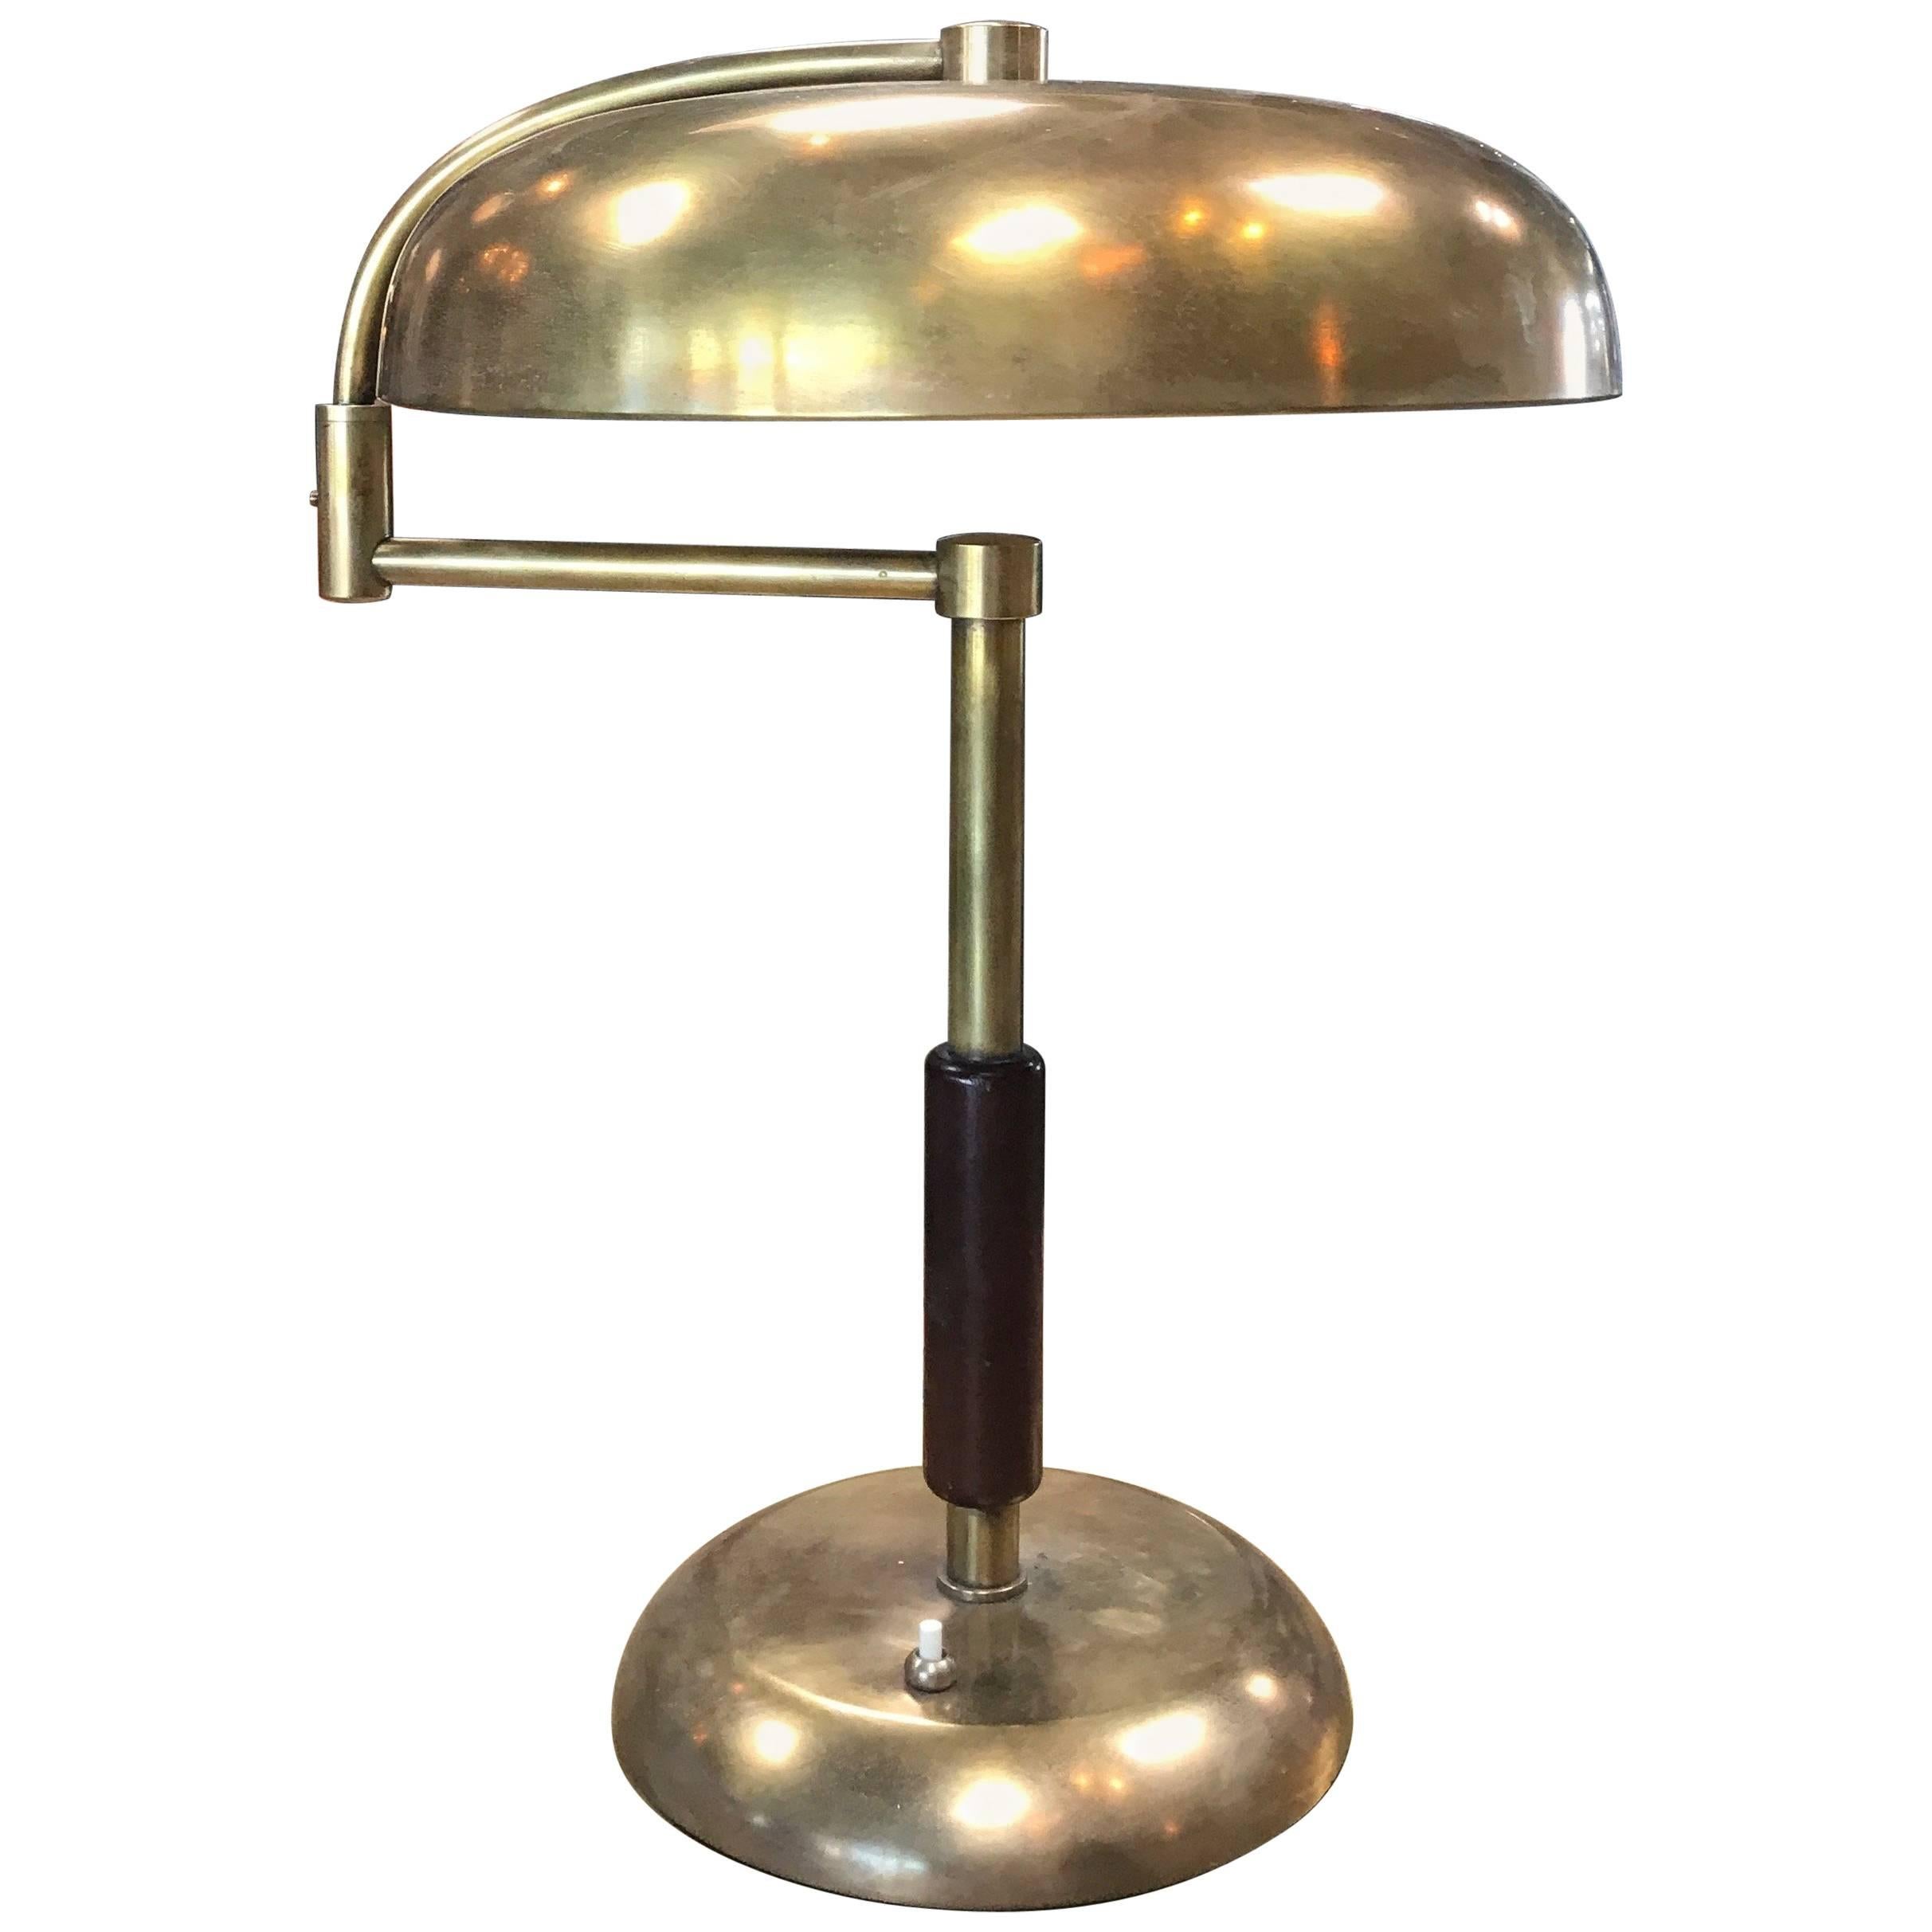 Italian Table Lamp in Brass and Wood with Swing Arm